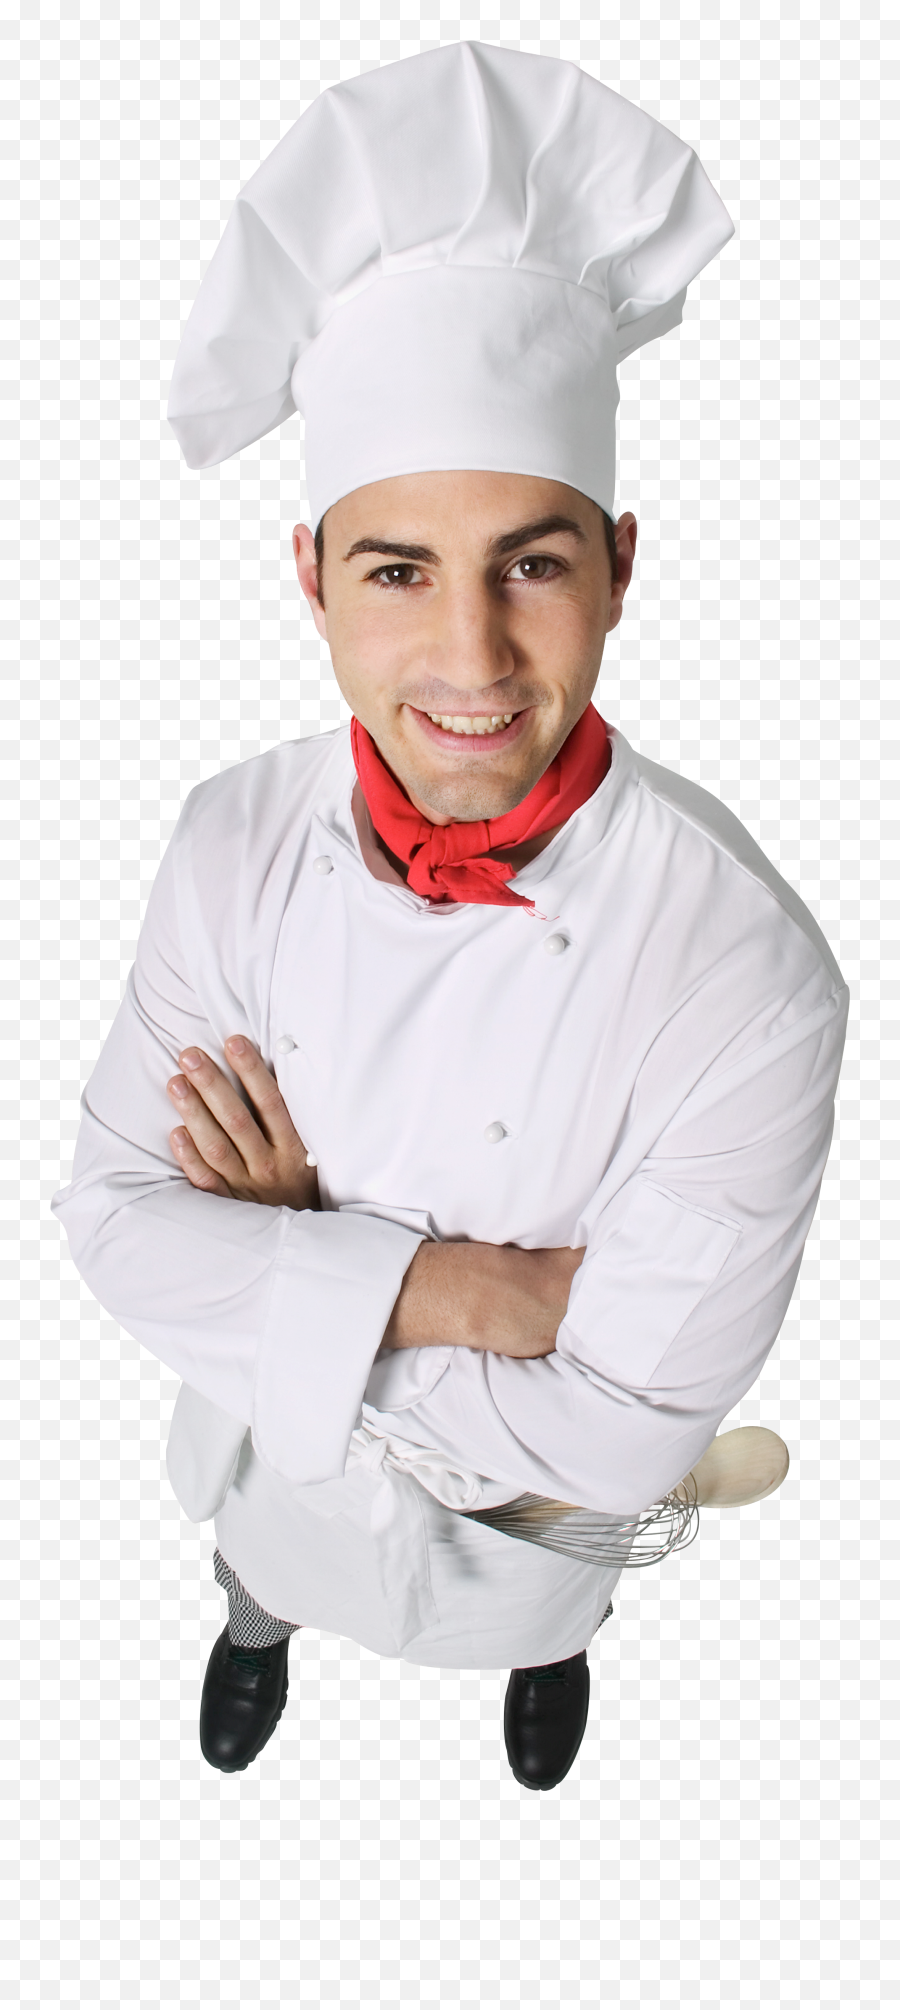 Chef Png Image Chefs Hat Images - Chef Top View,Chef Hat Transparent Background